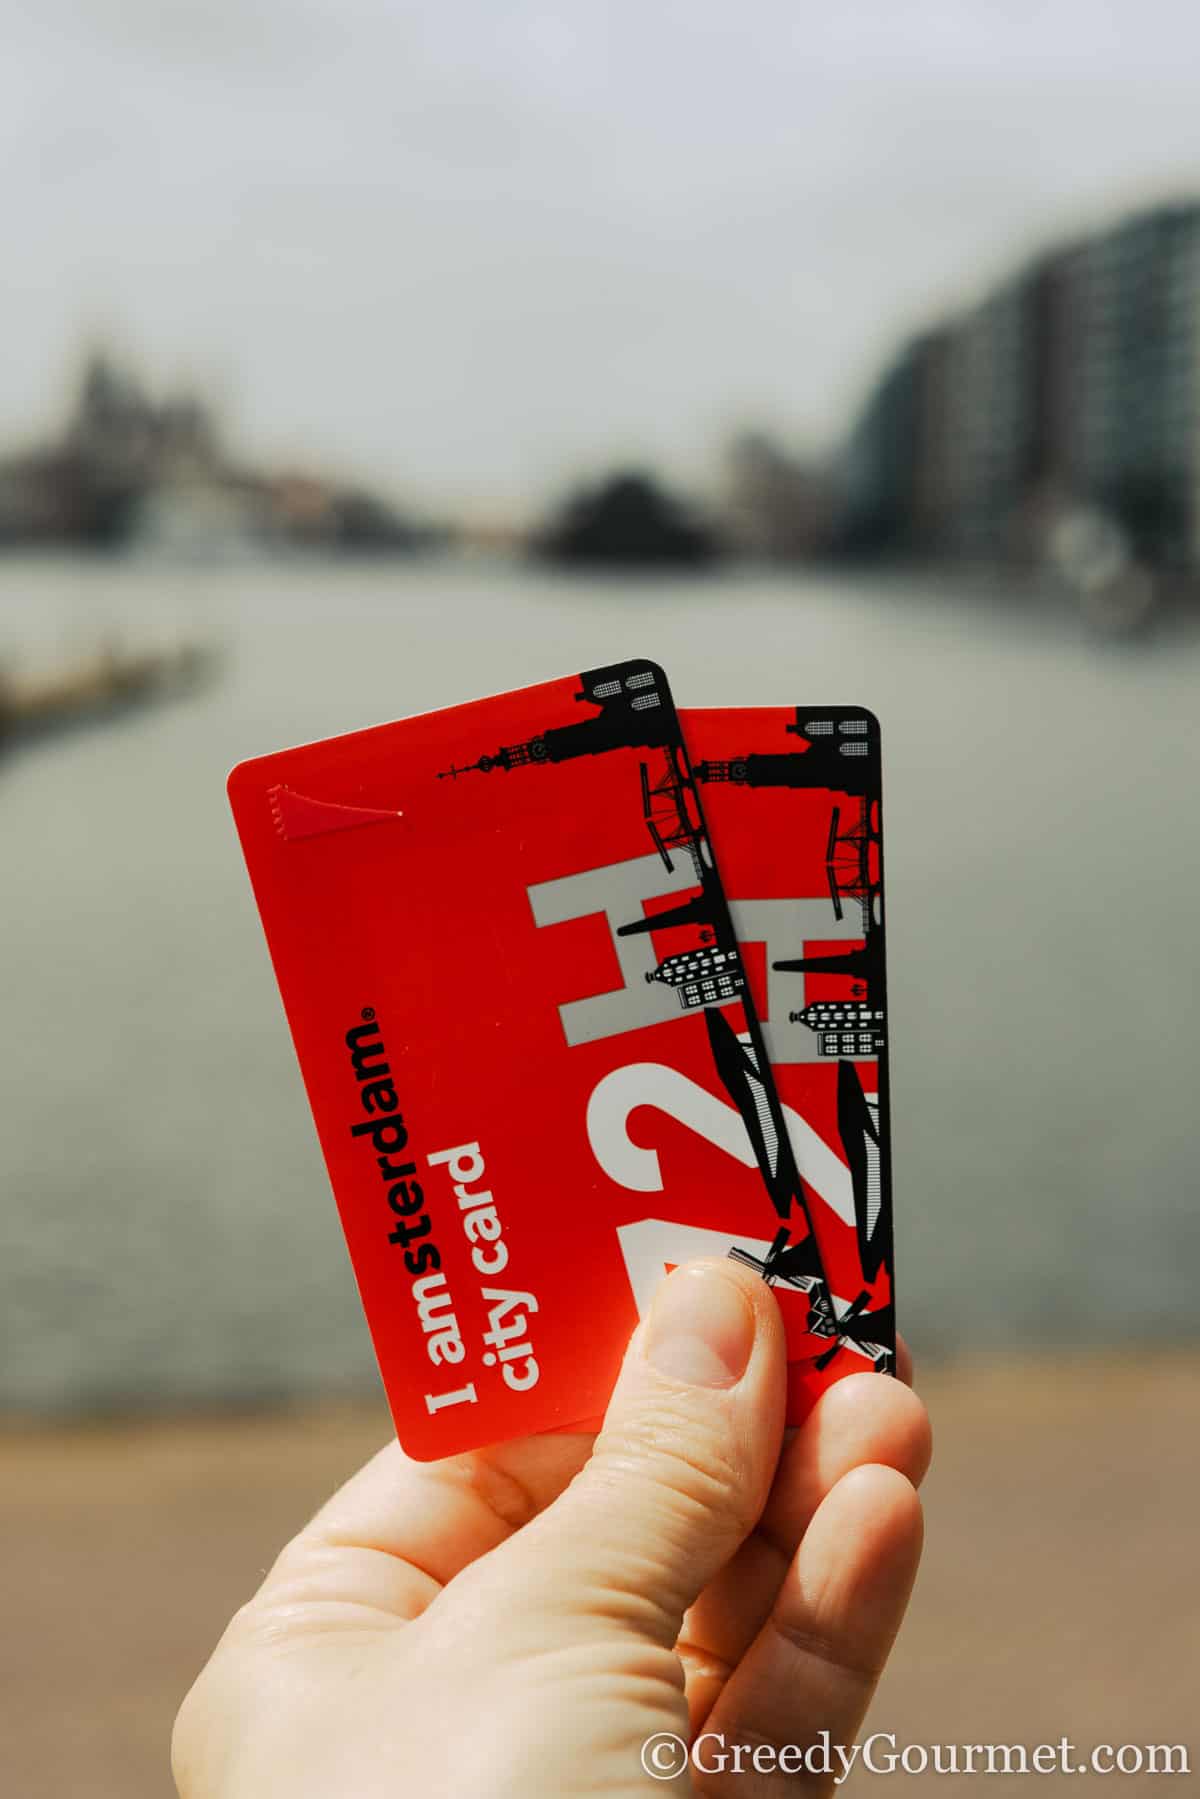 The hand of a person who is holding 2 red I Amsterdam city cards.